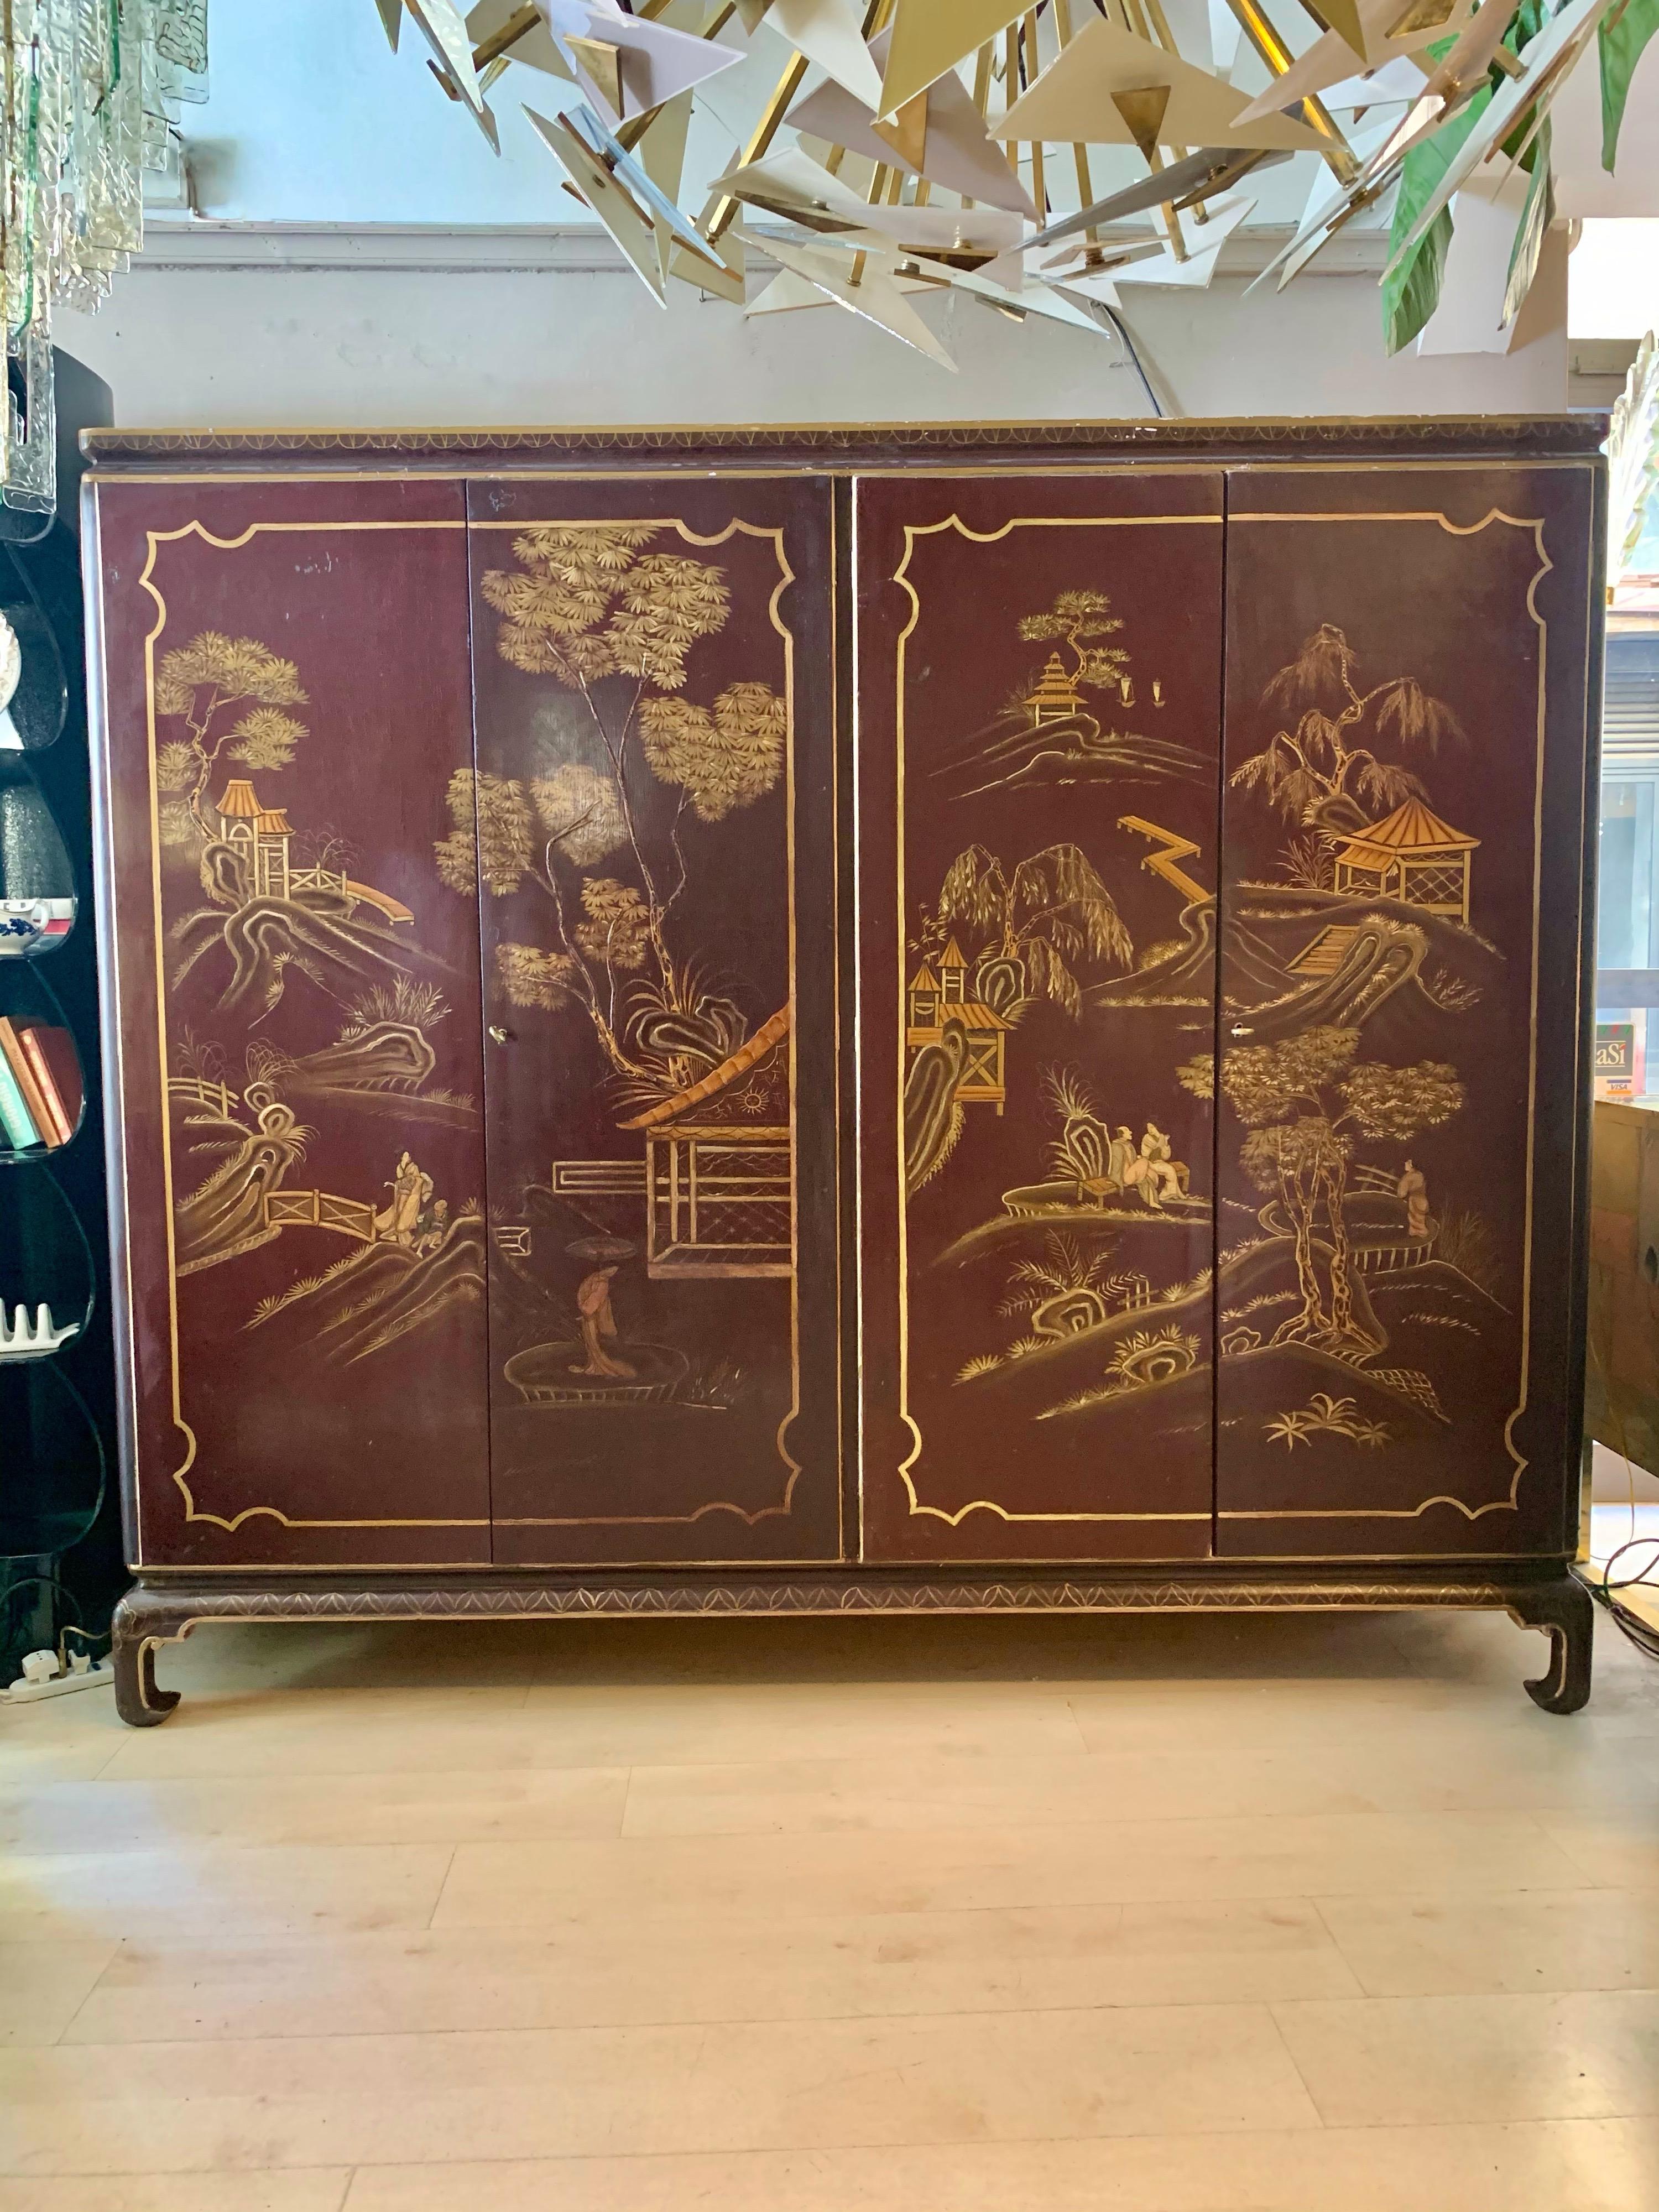 Antique English Chinoiserie storage cabinet with hand-painted Chinese décor depicting people and traditional architectures in a landscape. The doors and the sides are hand-painted Chinese scenes, presenting characters set among traditional